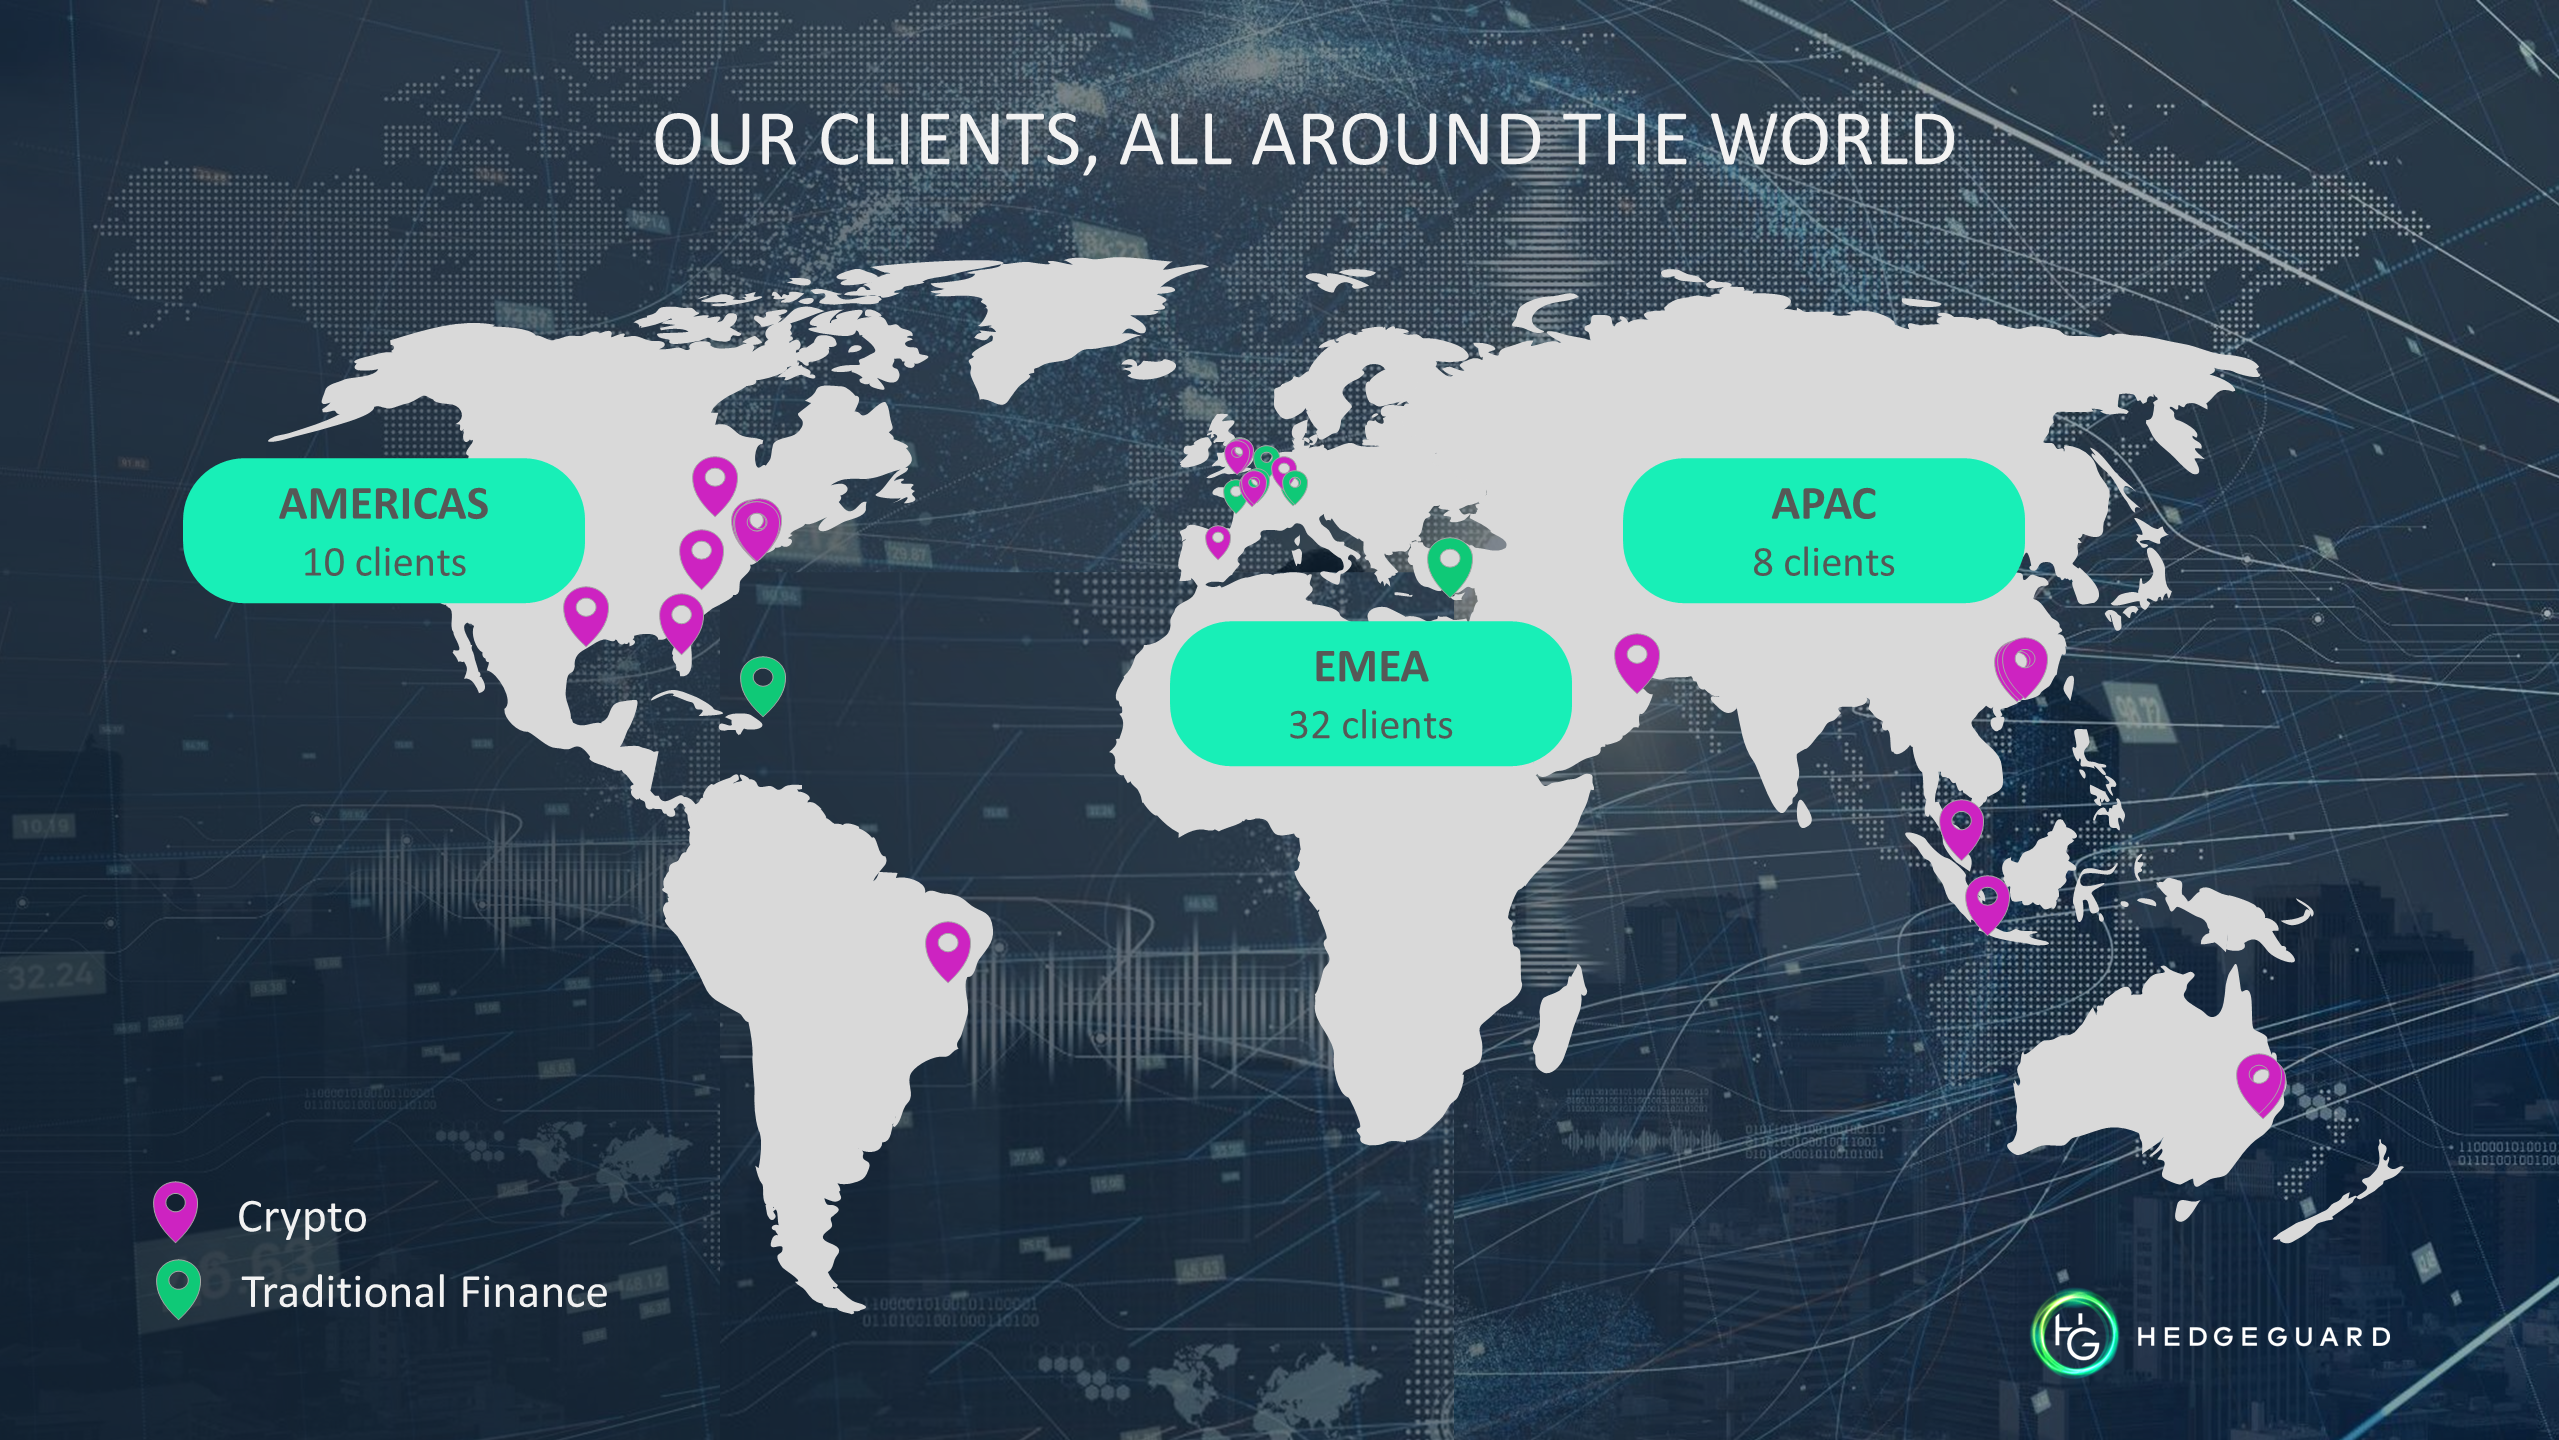 HedgeGuard clients all around the world